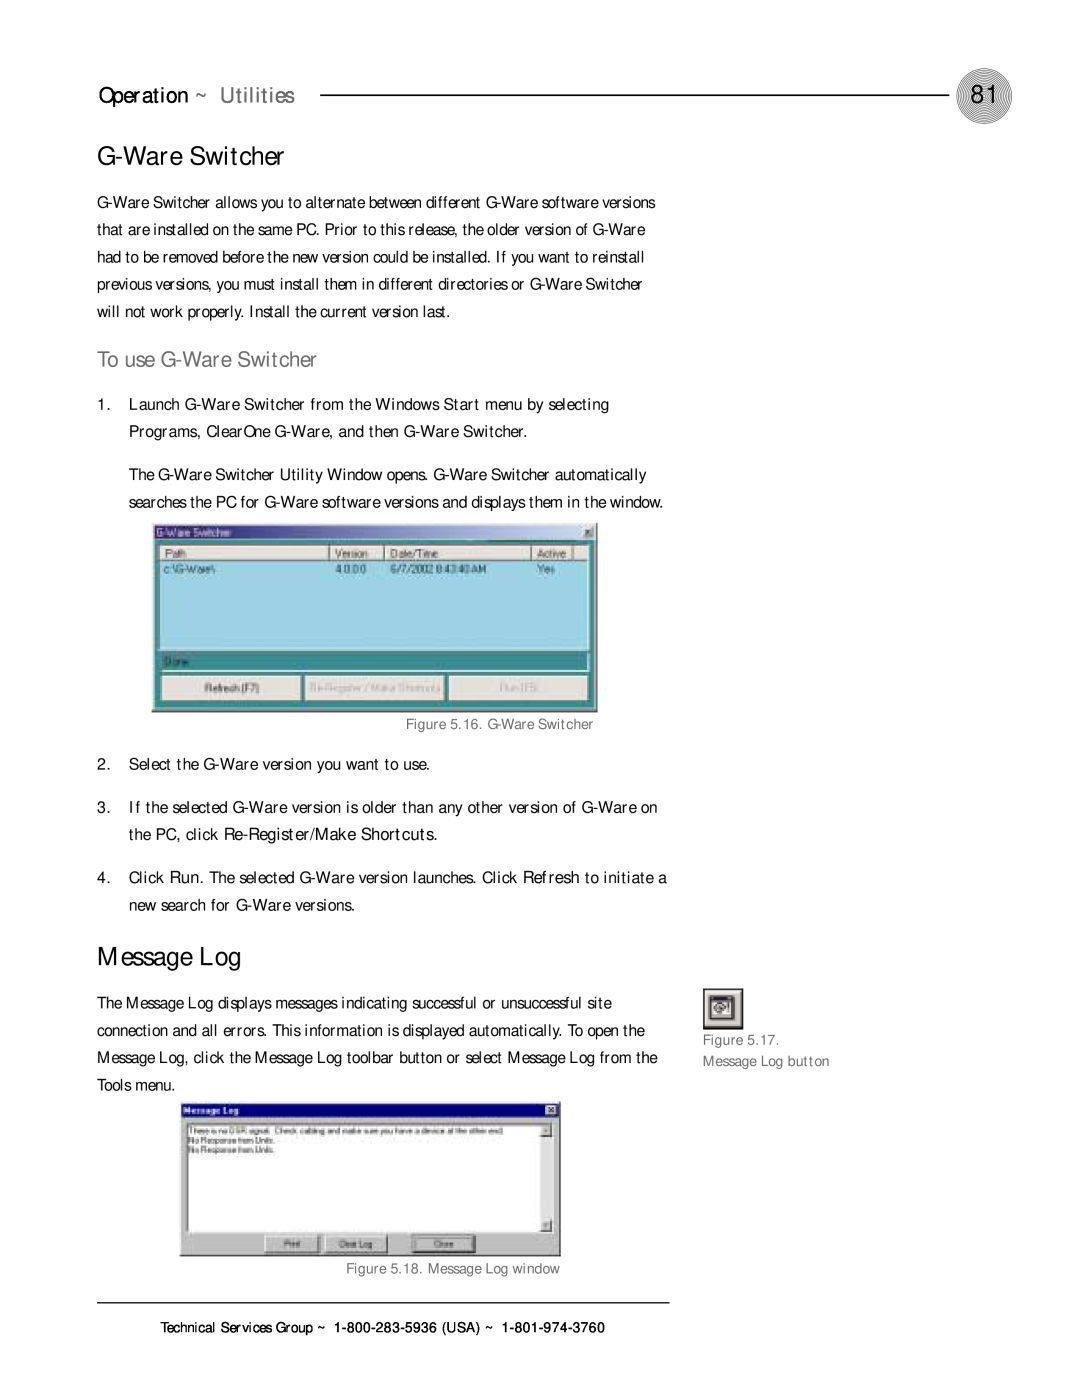 ClearOne comm XAP 400 operation manual Message Log, To use G-WareSwitcher, Operation ~ Utilities 